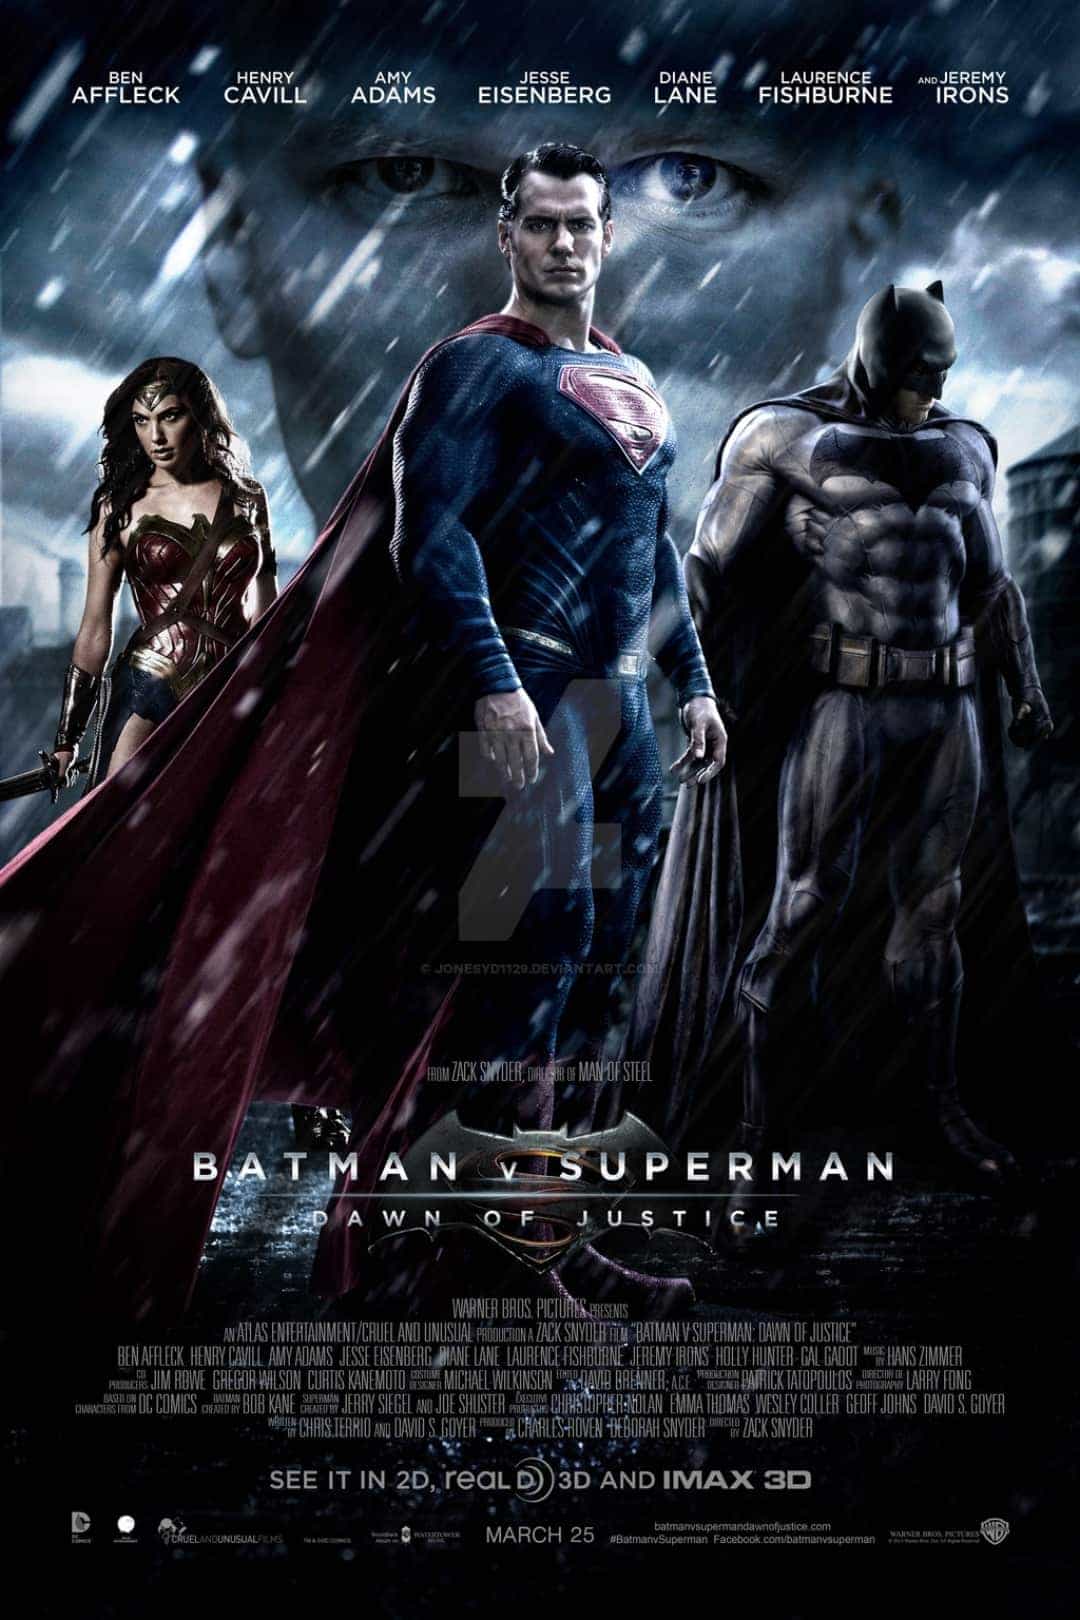 Batman gets first billing in new title Batman V Superman: Dawn of Justice, film out May 6 2016